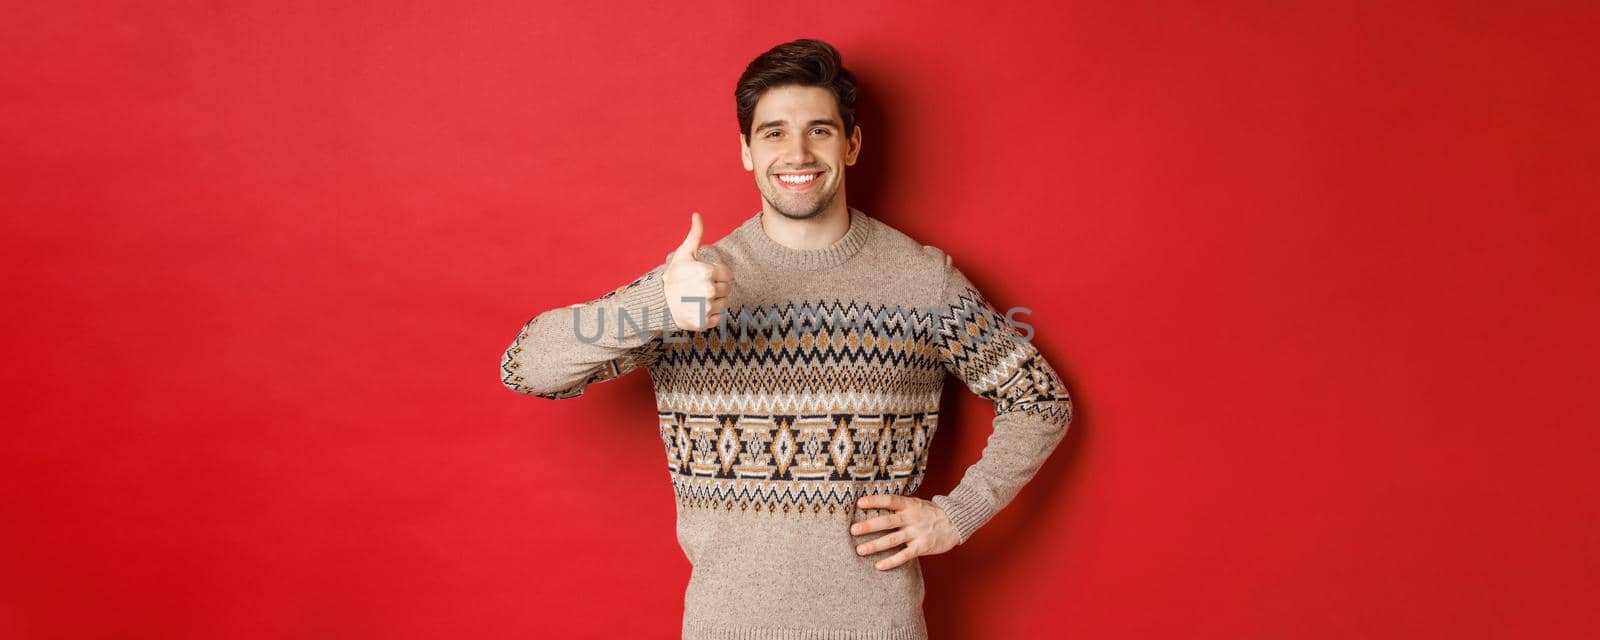 Portrait of happy handsome man in christmas sweater, smiling and looking satisfied, showing thumbs-up in approval, like new year holiday, standing over red background.